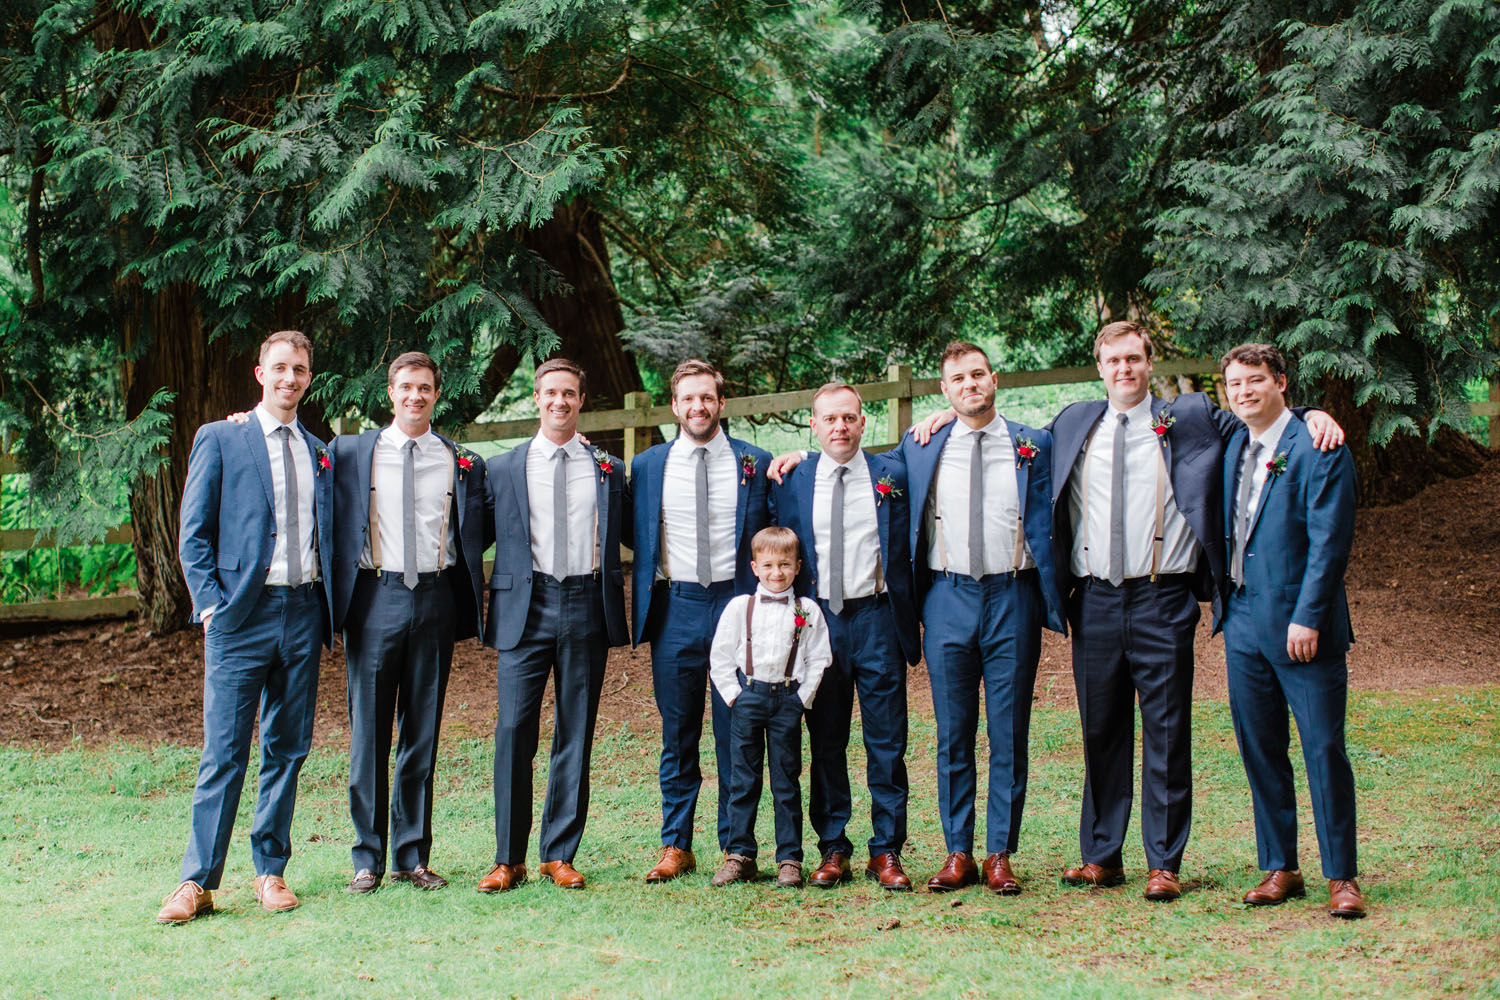 delille cellars groomsmen navy suits wedding party photography.jpg